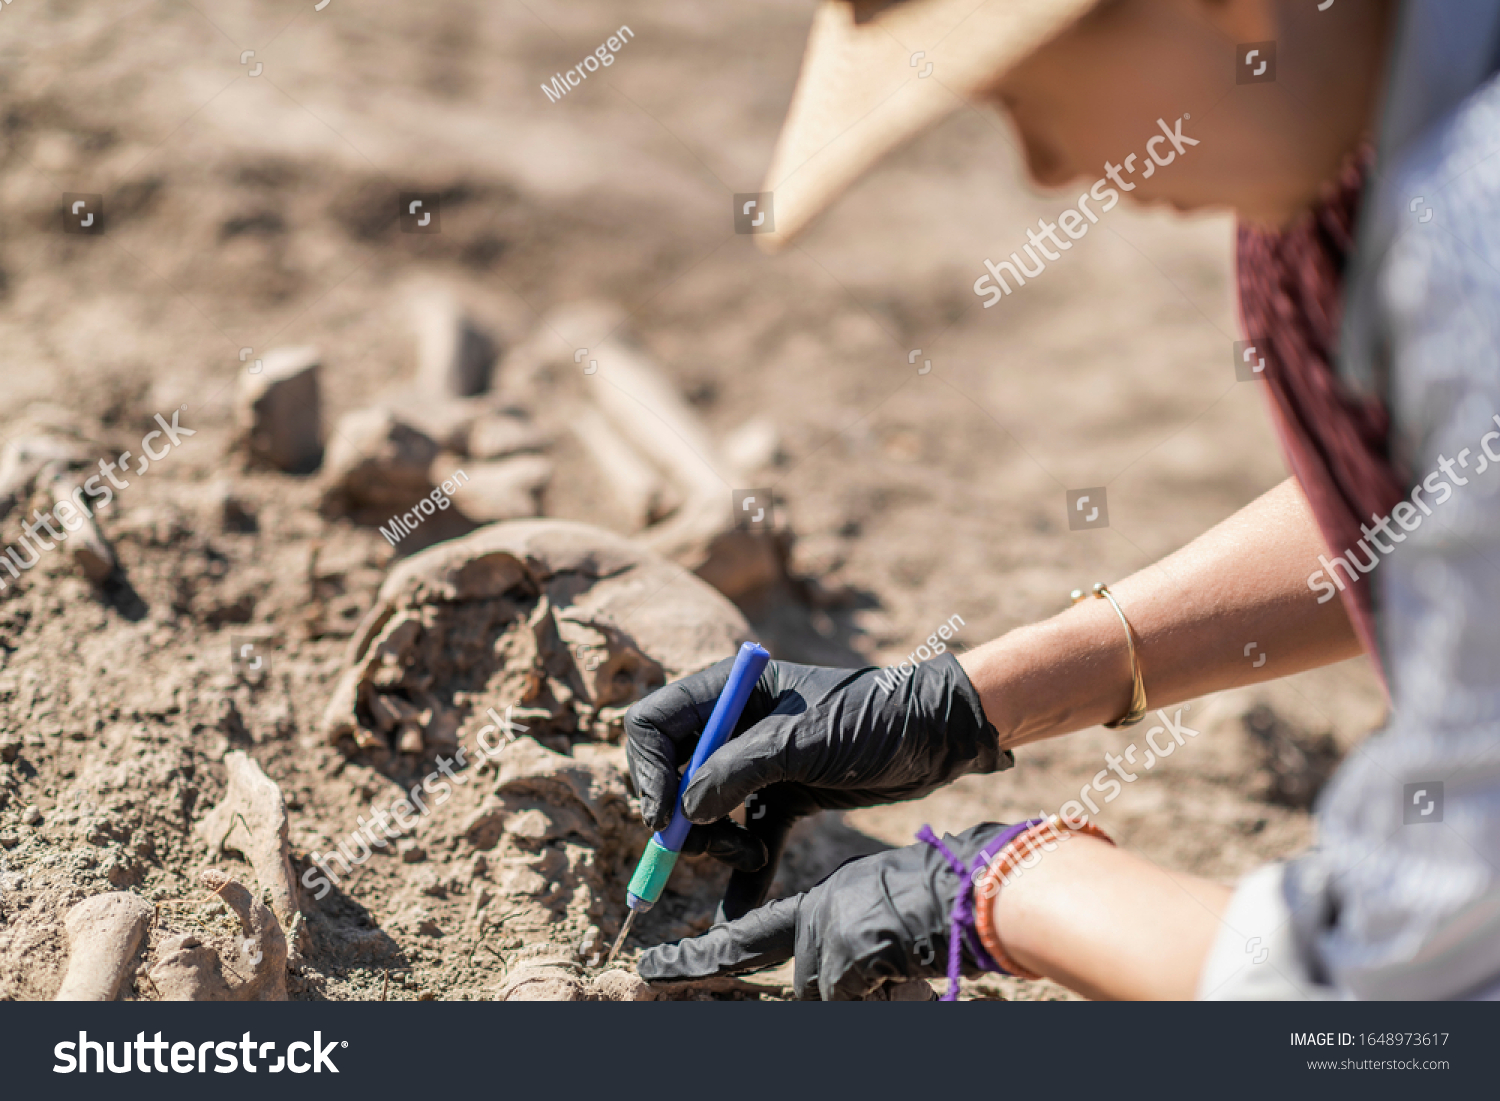 Archaeology - excavating ancient human remains with digging tool kit set at archaeological site.  #1648973617